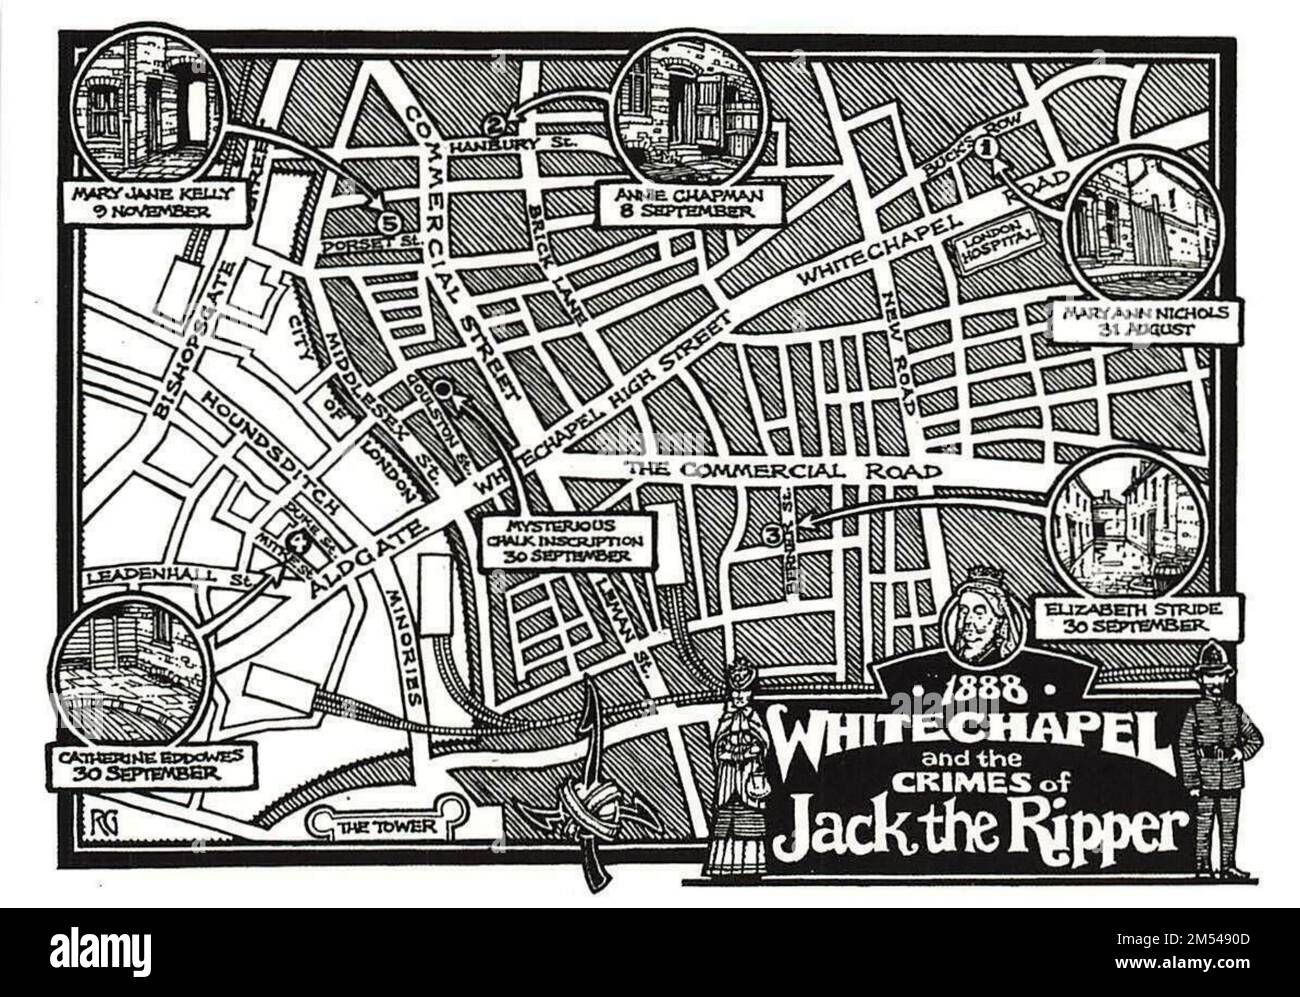 Vintage reproduction of 1888 Whitechapel, London depicting 'Jack the Ripper' crimes location map Stock Photo